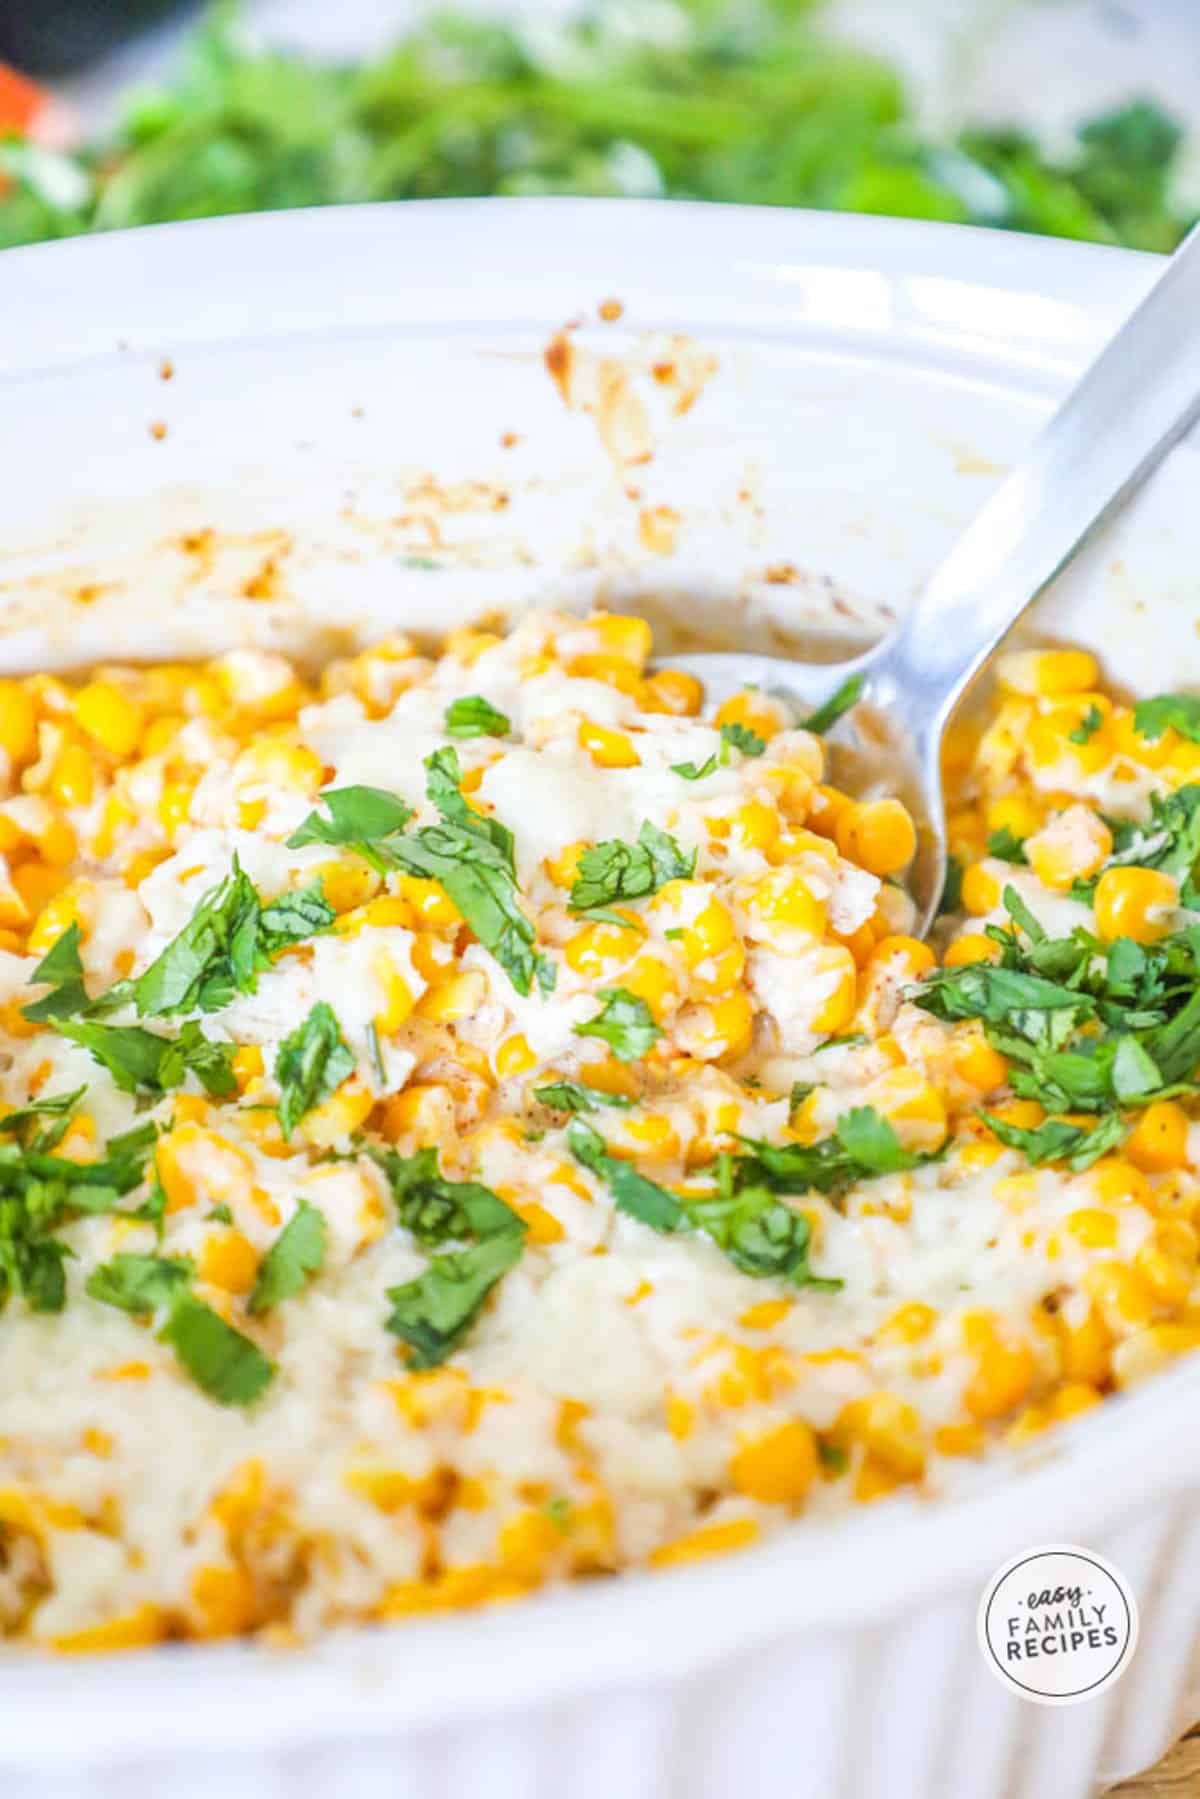 Scooping a spoonful of Baked Mexican Corn Casserole from serving dish